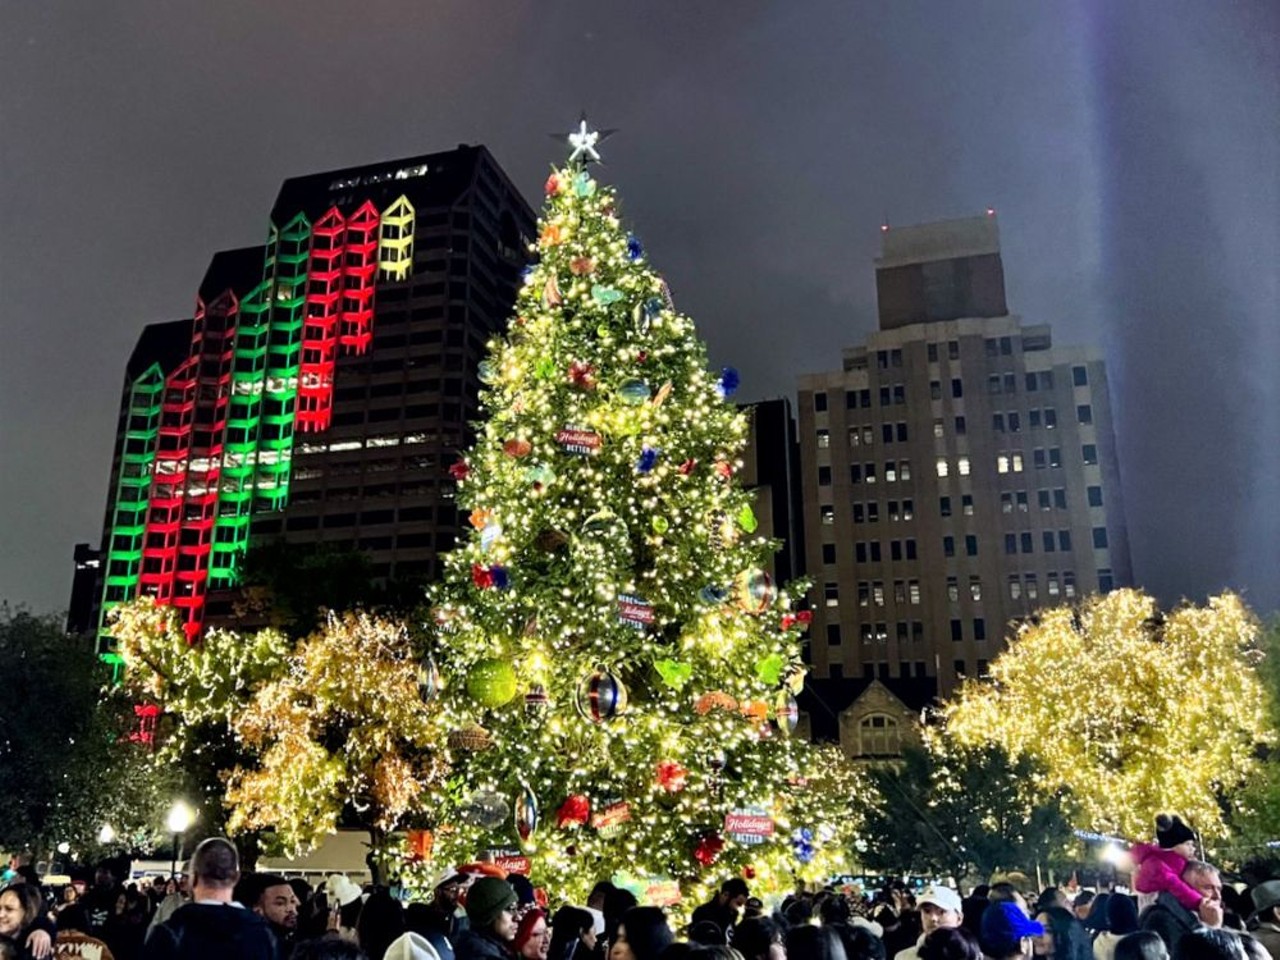 Watch the tree lighting at Travis Park
An annual tradition, the lighting of the 50-foot christmas tree in Travis Park brings crowds every year to celebrate the start of the holiday season.